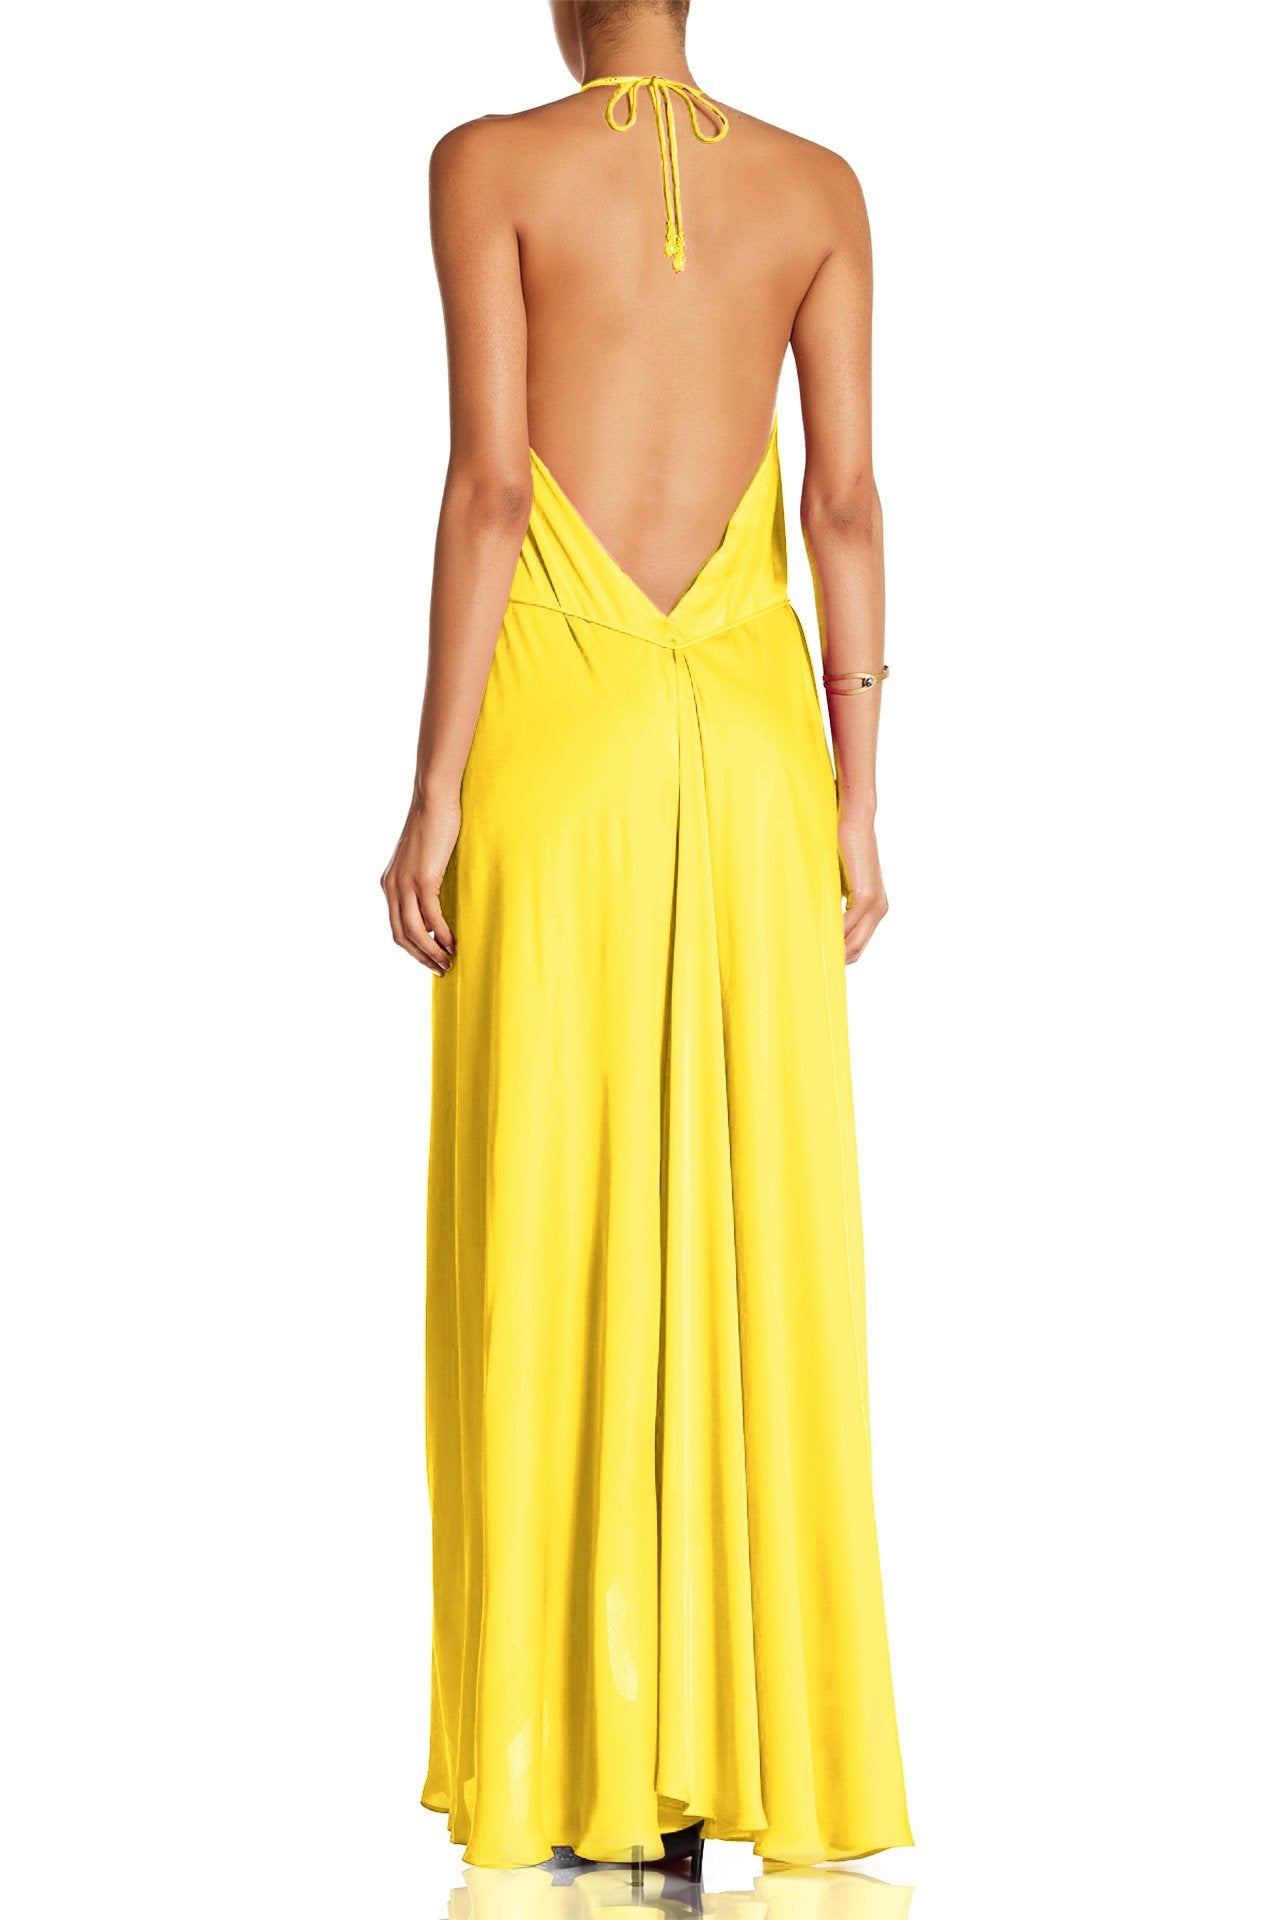 Solid-Yellow-Maxi-Dress